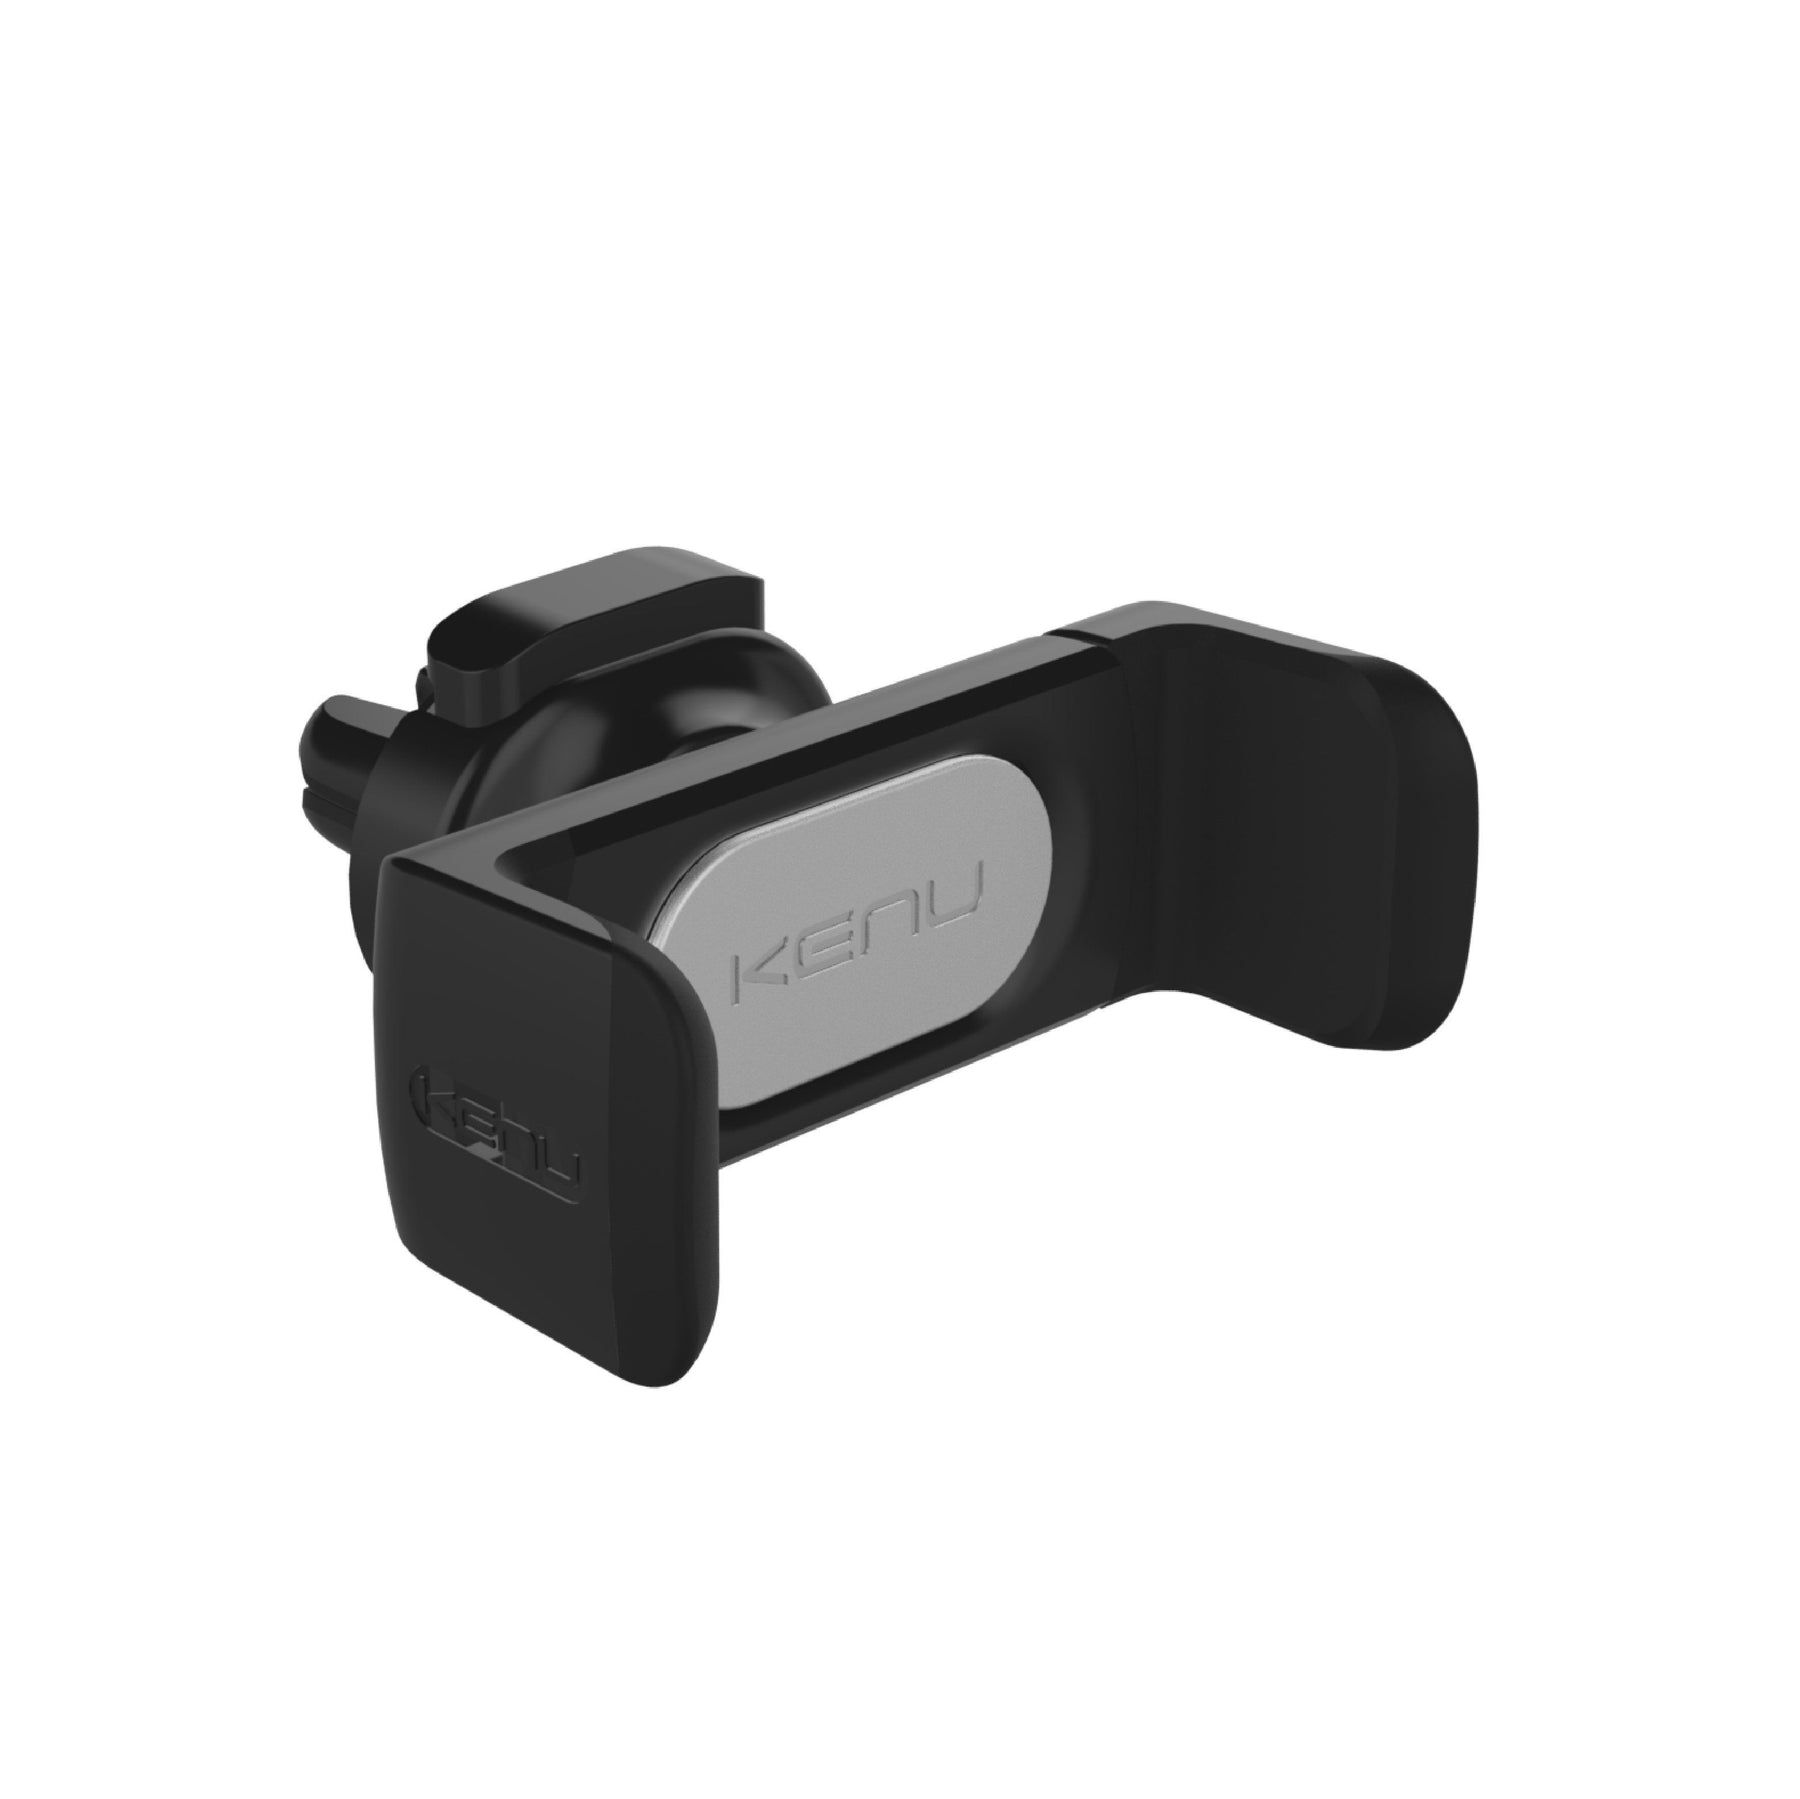 Support voiture Kenu Airframe Pro Noir pour Smartphone - Support